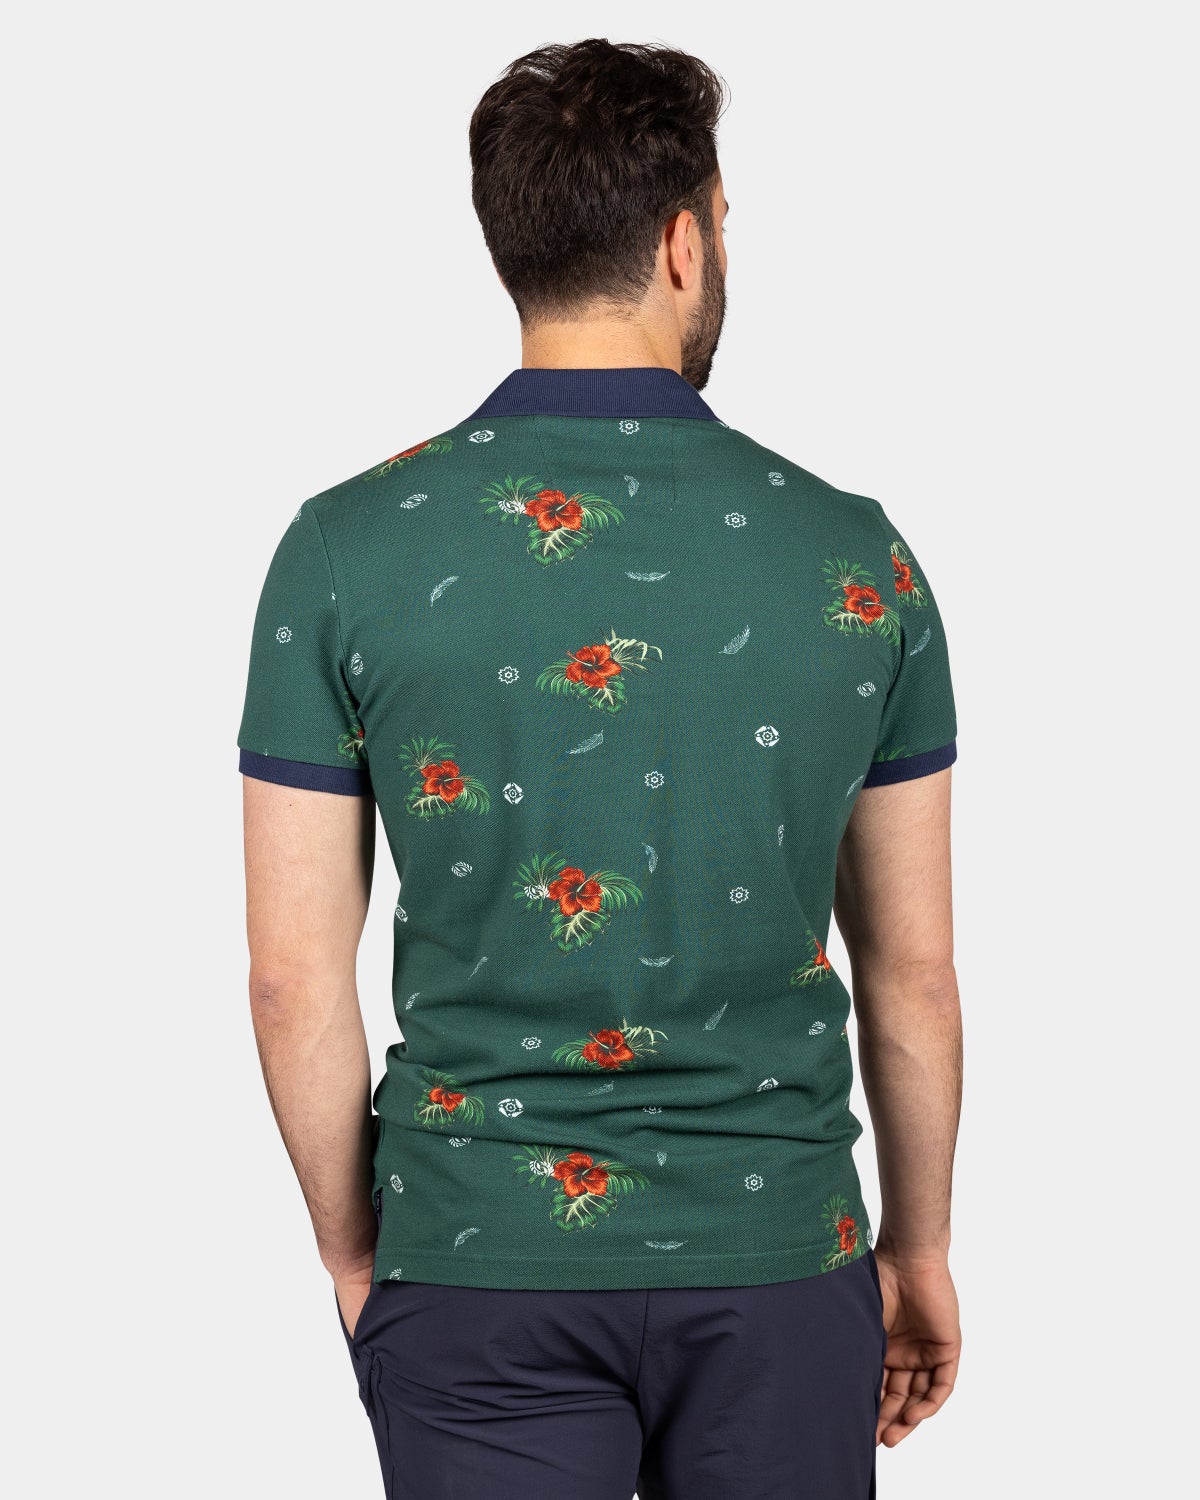 Green polo with red flowers - Classic Green